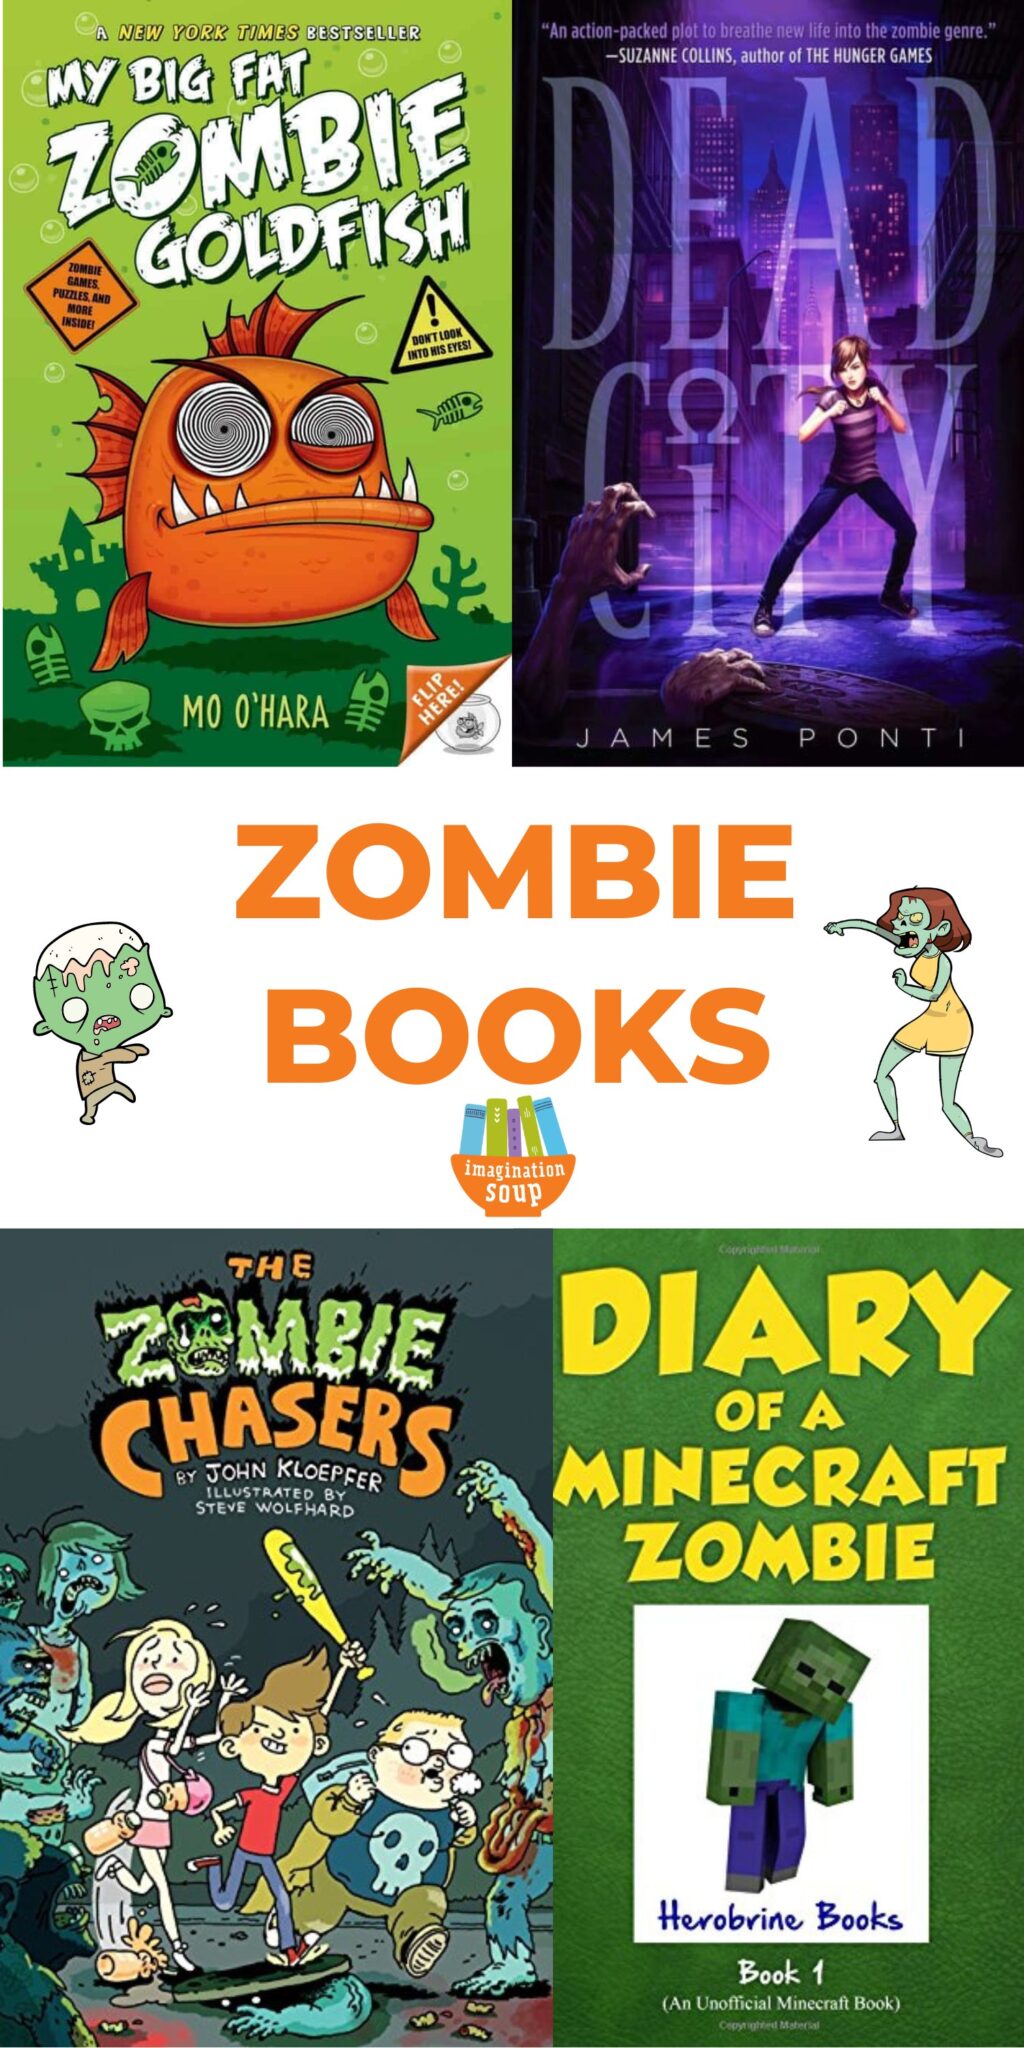 16 Really Good Zombie Books (For Kids and Teens) - Imagination Soup